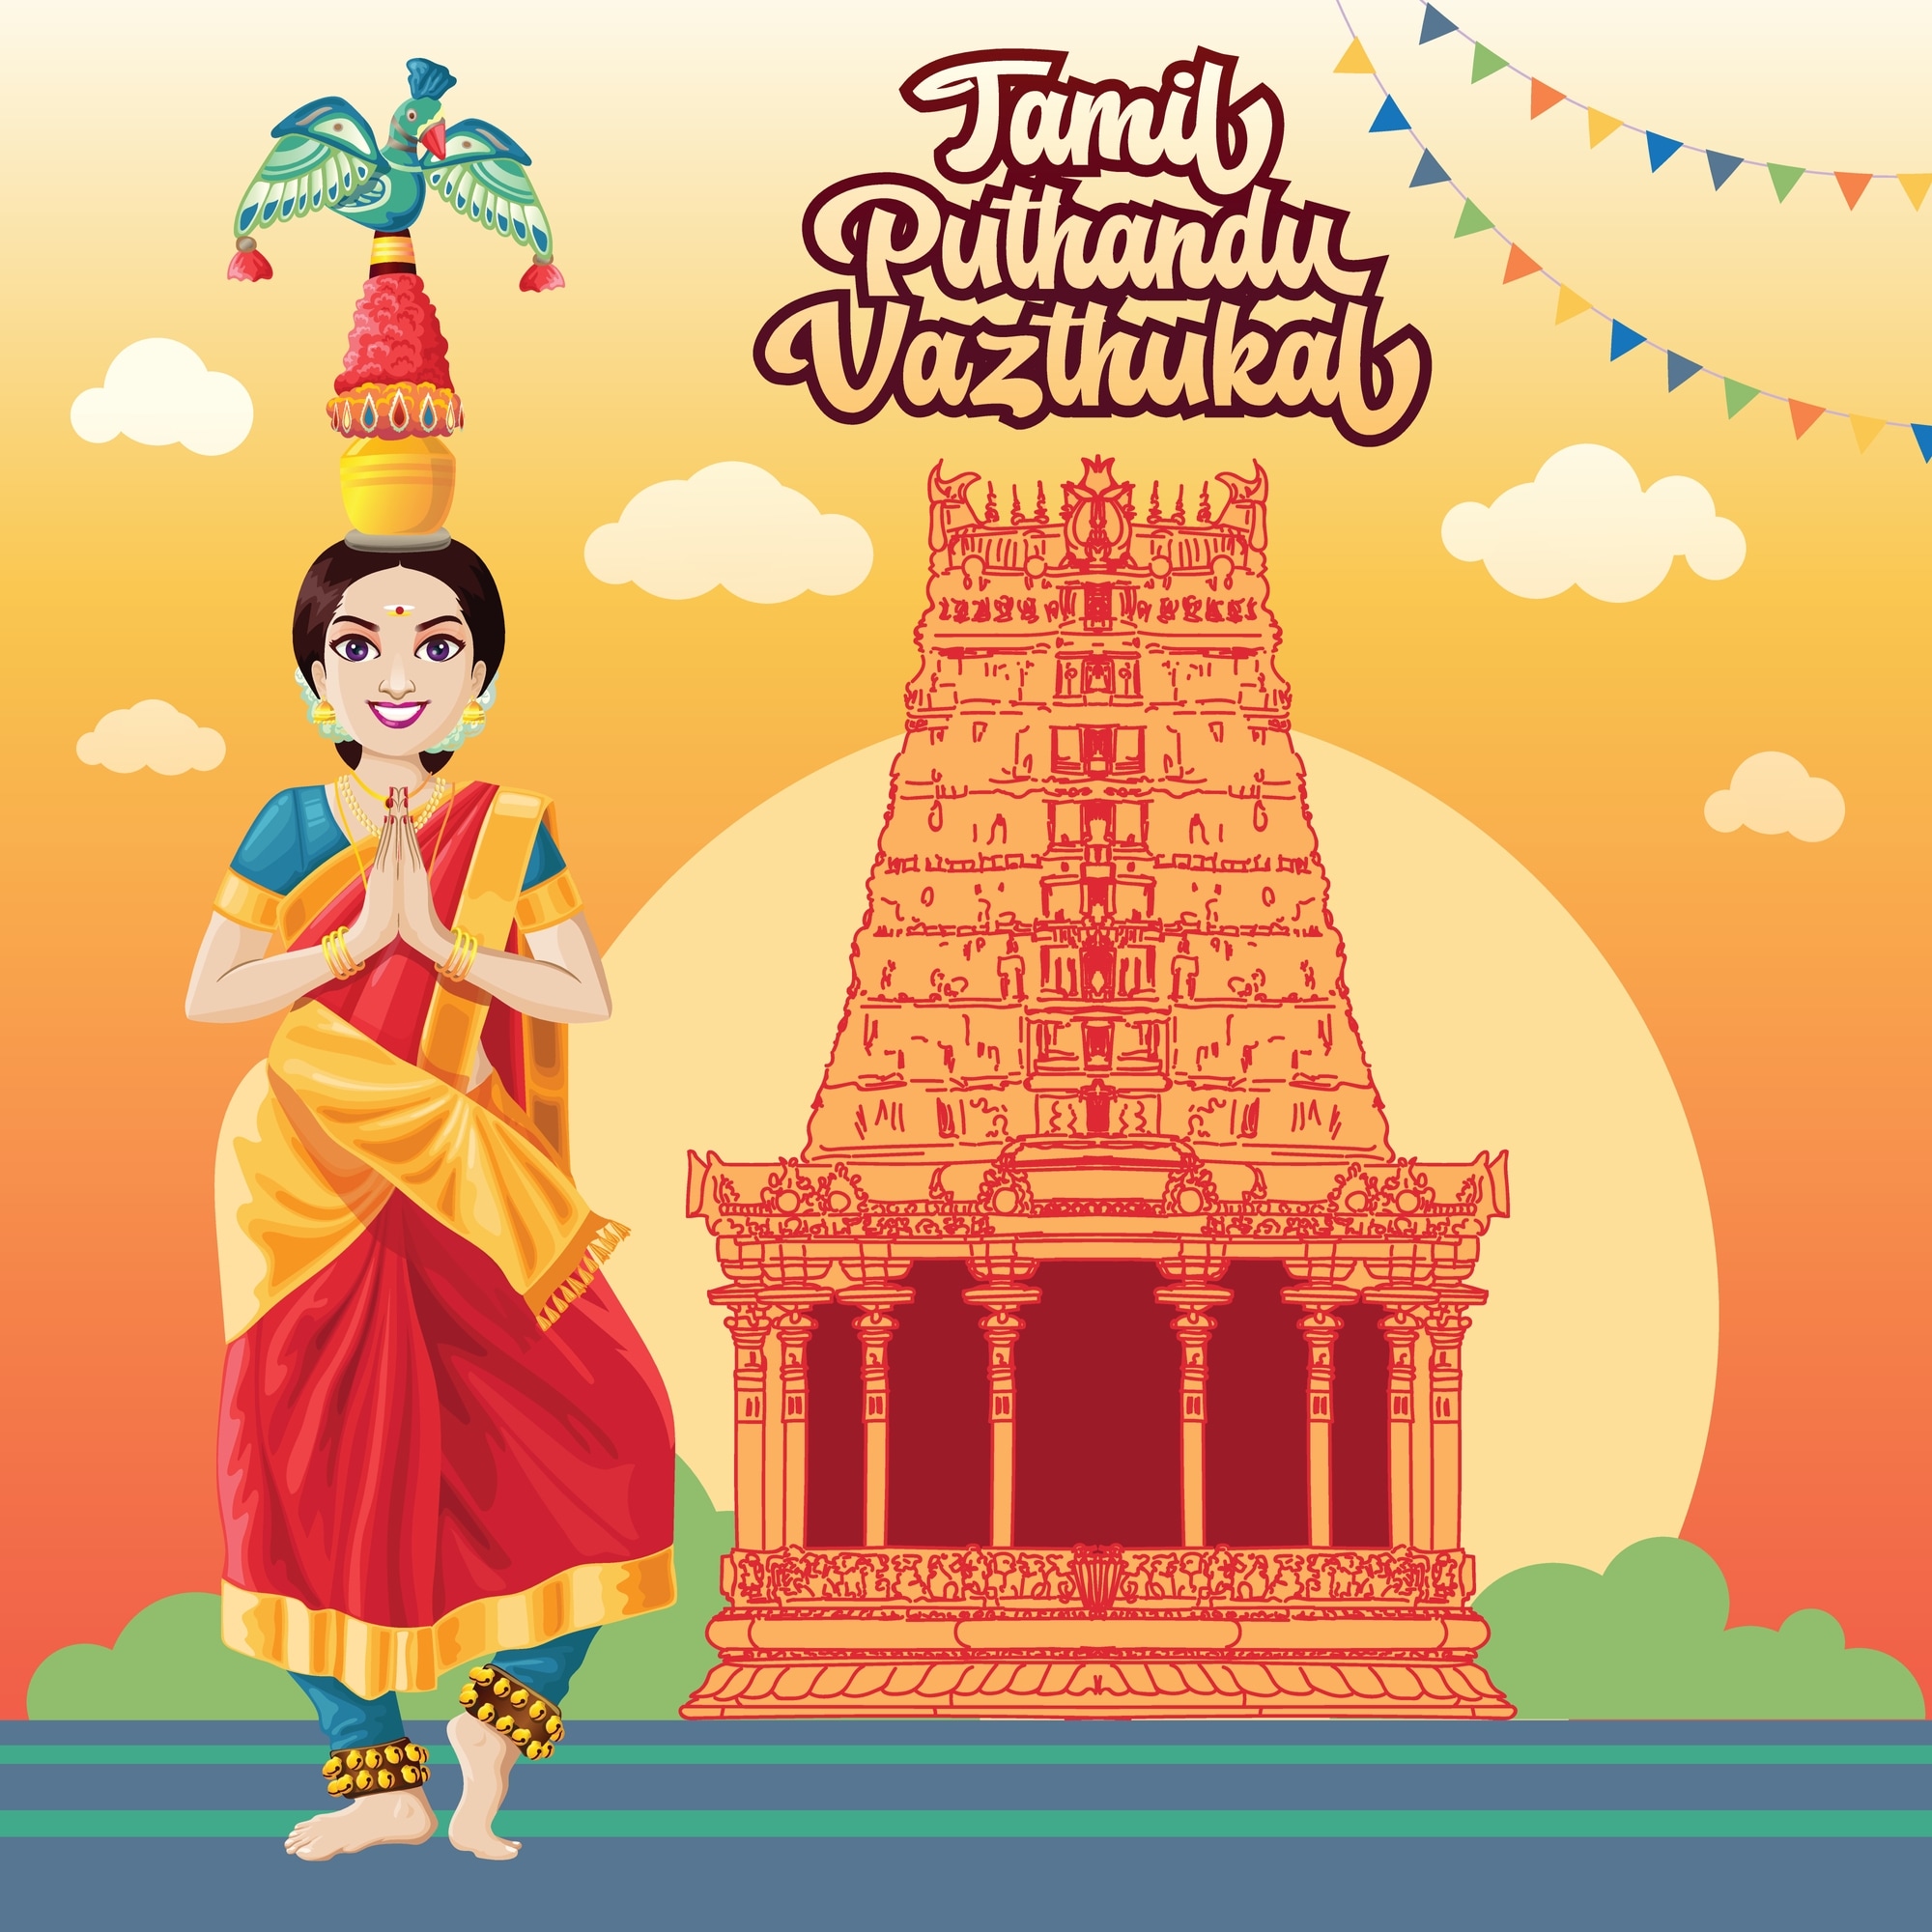 Happy Tamil New Year 2022 Wishes, Images, Status, Quotes, Messages and